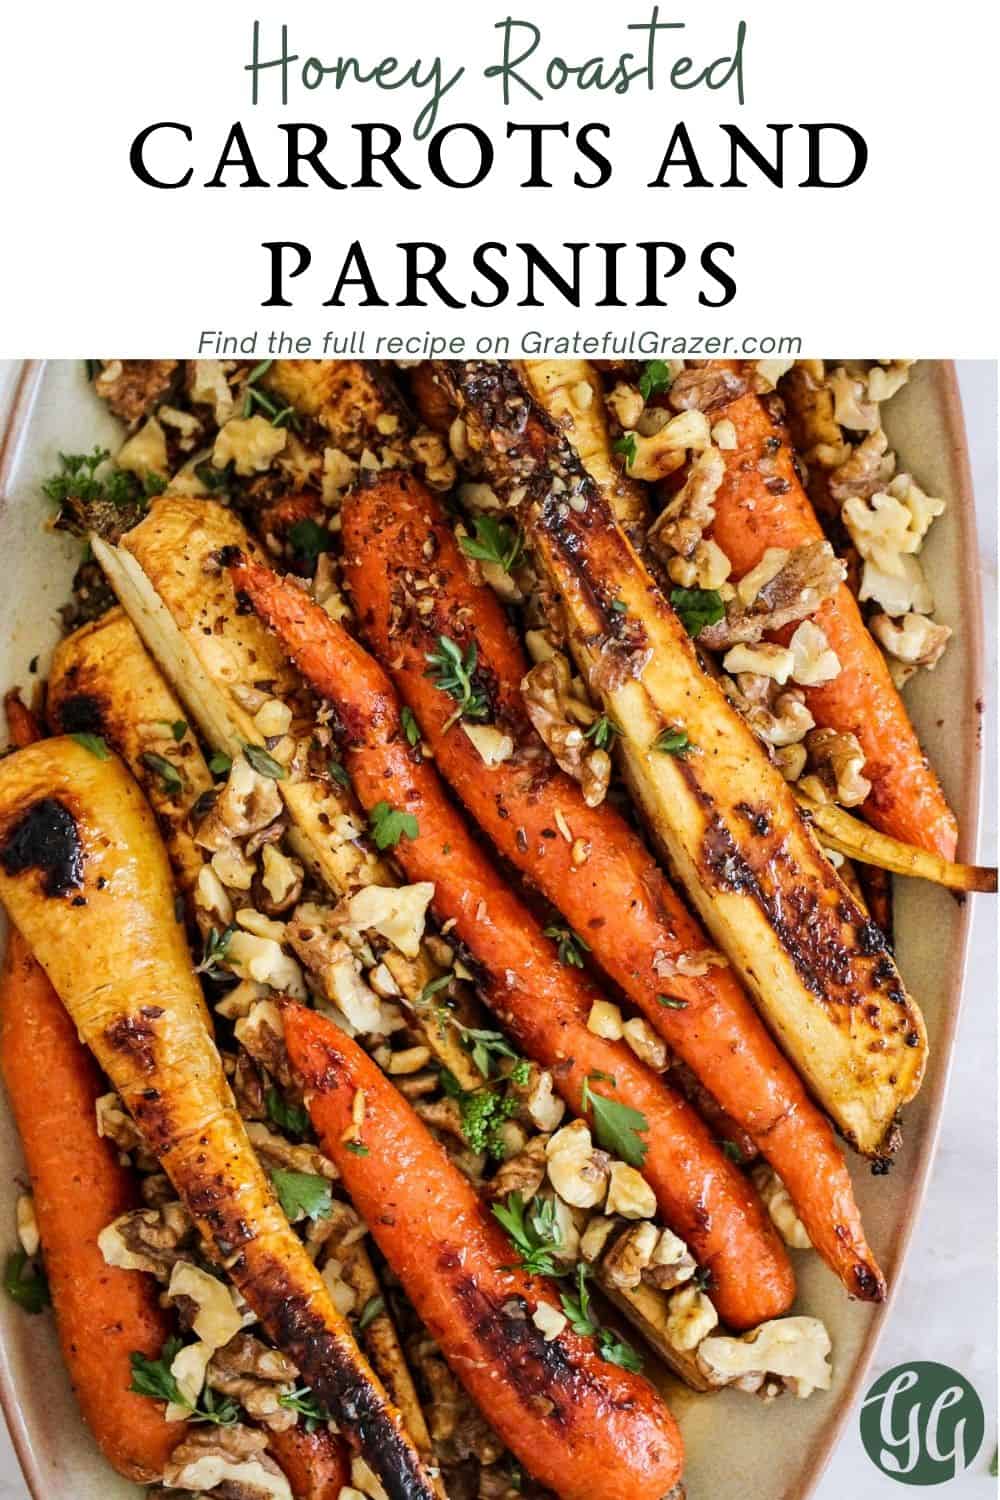 Roasted vegetables with nuts and parsley on beige ceramic platter with text reading, "Honey Roasted Carrots and Parsnips - find the full recipe on GratefulGrazer.com."